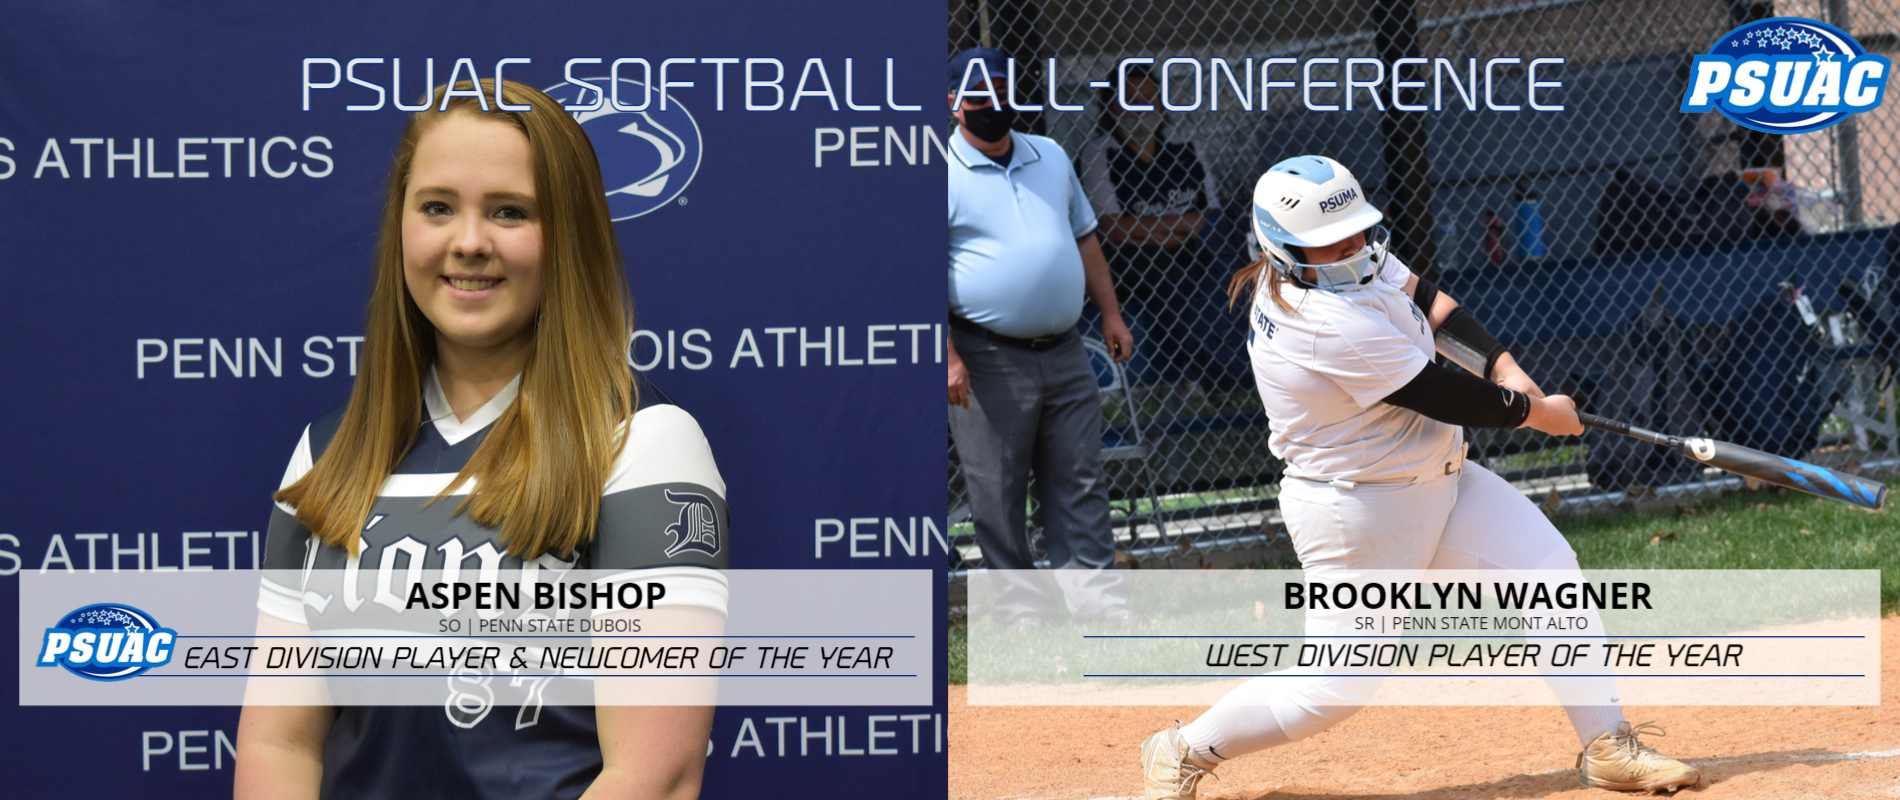 Penn State DuBois' Aspen Bishop and Penn State Mont Alto's Brooklyn Wagner earned Player of the Year honors in their respective divisions for softball.